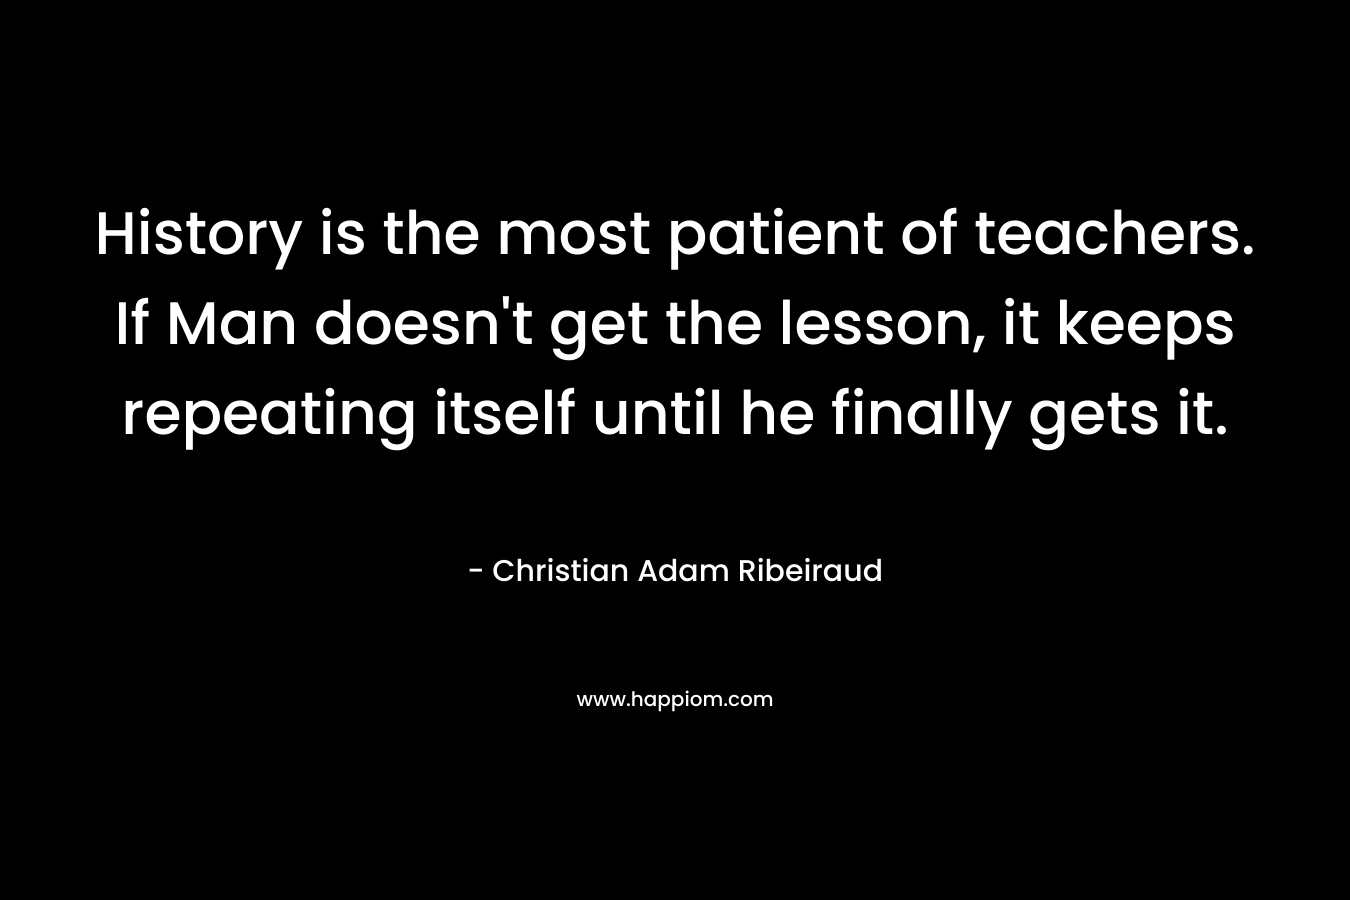 History is the most patient of teachers. If Man doesn’t get the lesson, it keeps repeating itself until he finally gets it. – Christian Adam Ribeiraud